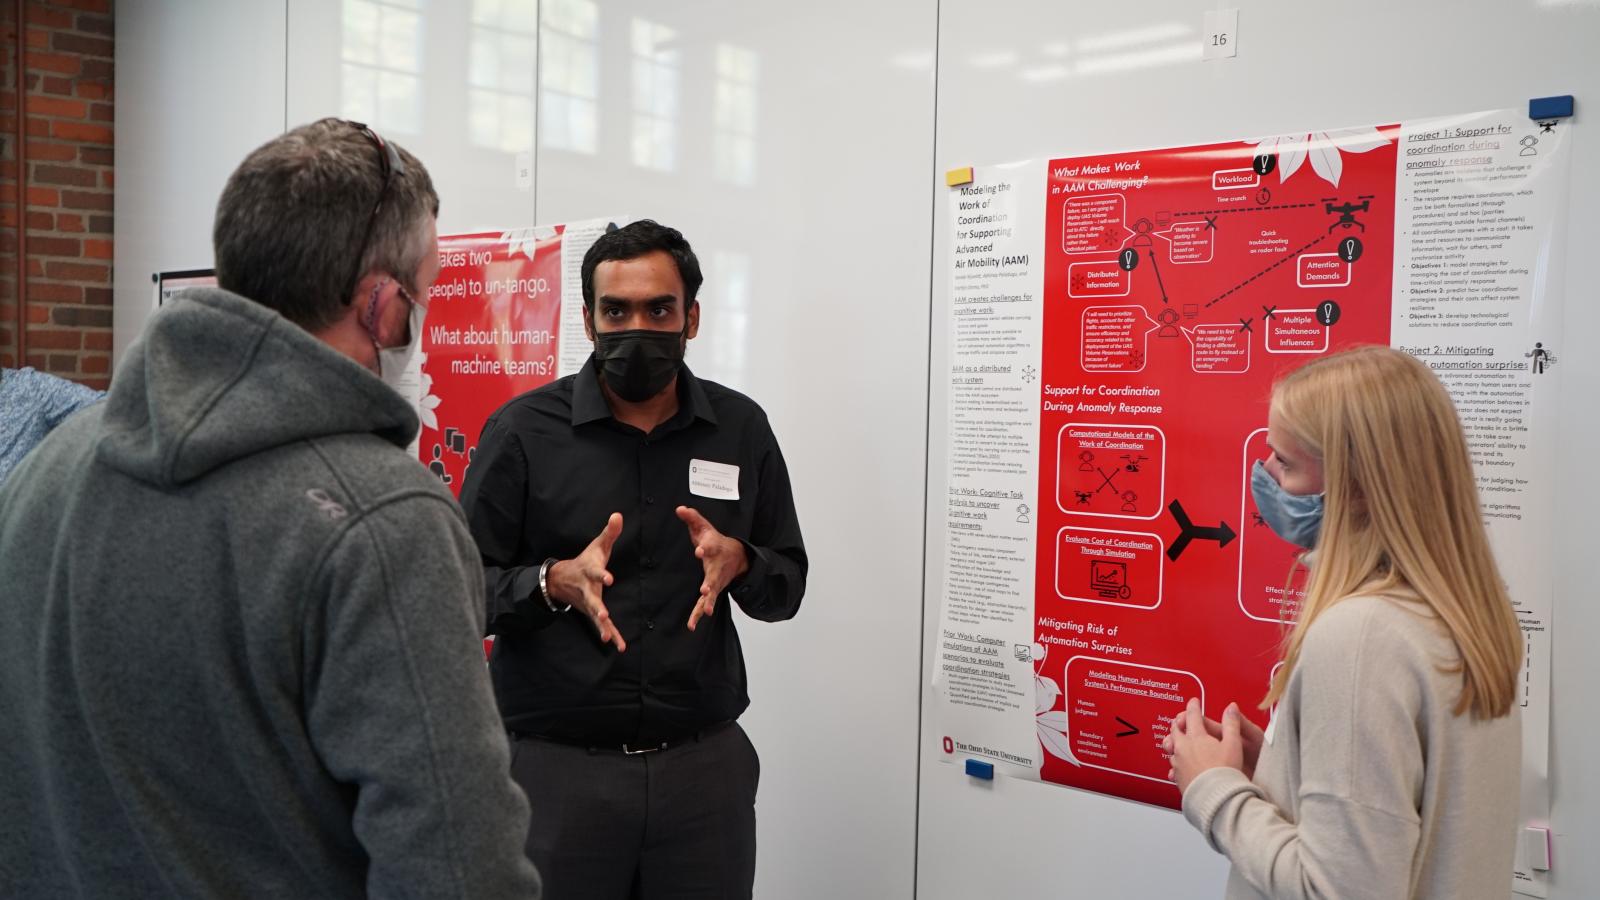 A man discusses his research poster with another man and a woman at the Fall Forum poster session